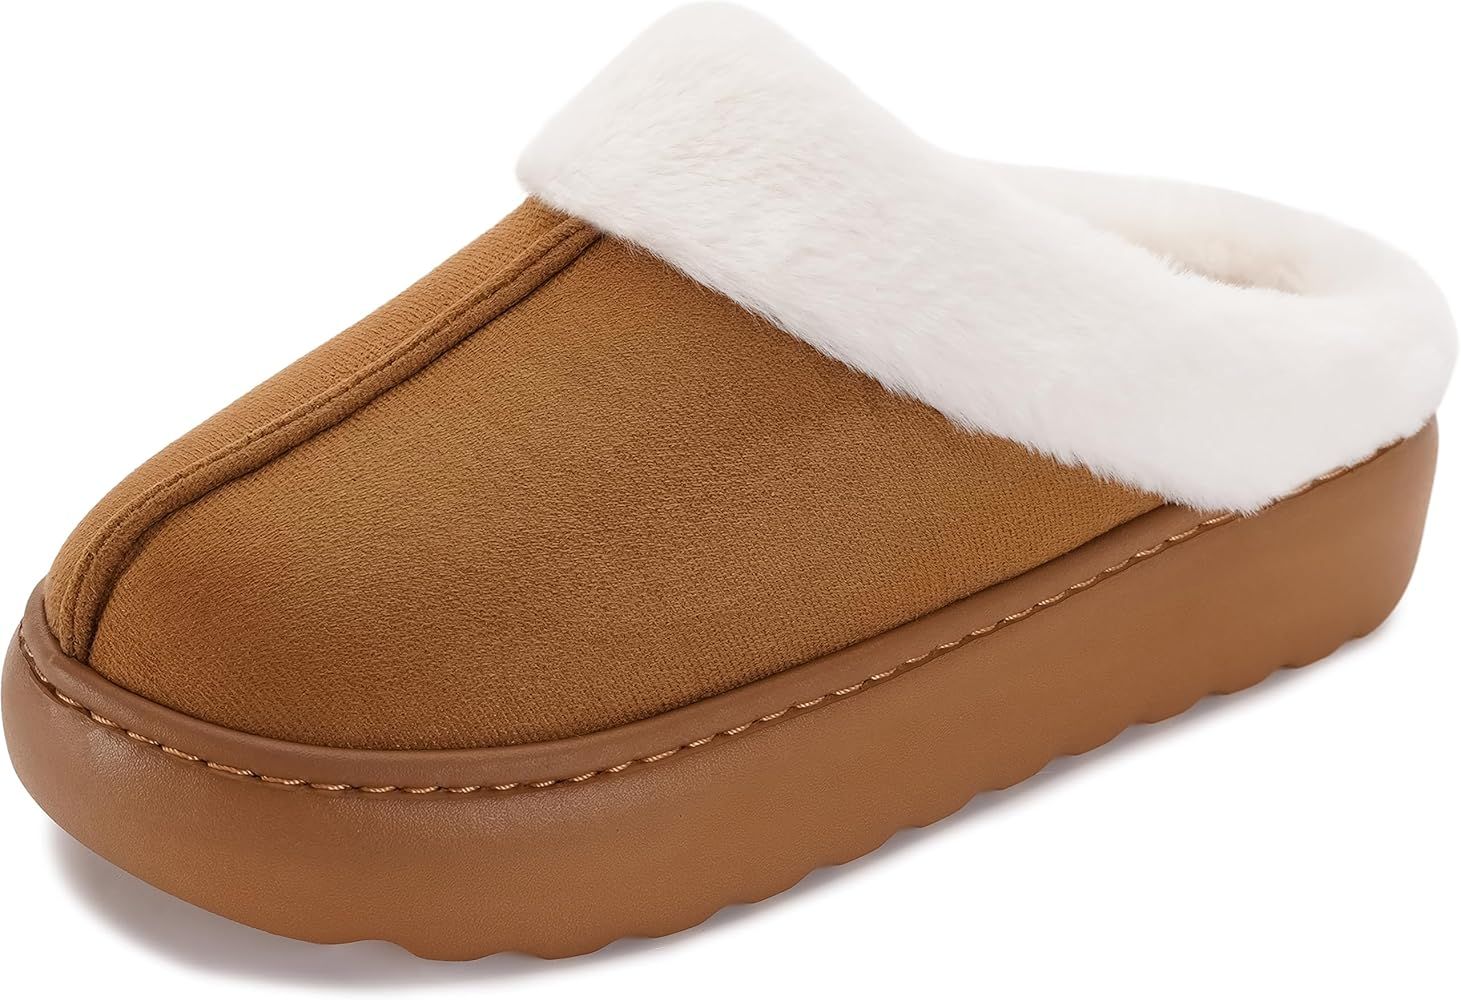 Joomra Women Pillow Warm Slippers Fuzzy House Shoes | Extremely Comfy | Cushion Thick Sole | Amazon (US)